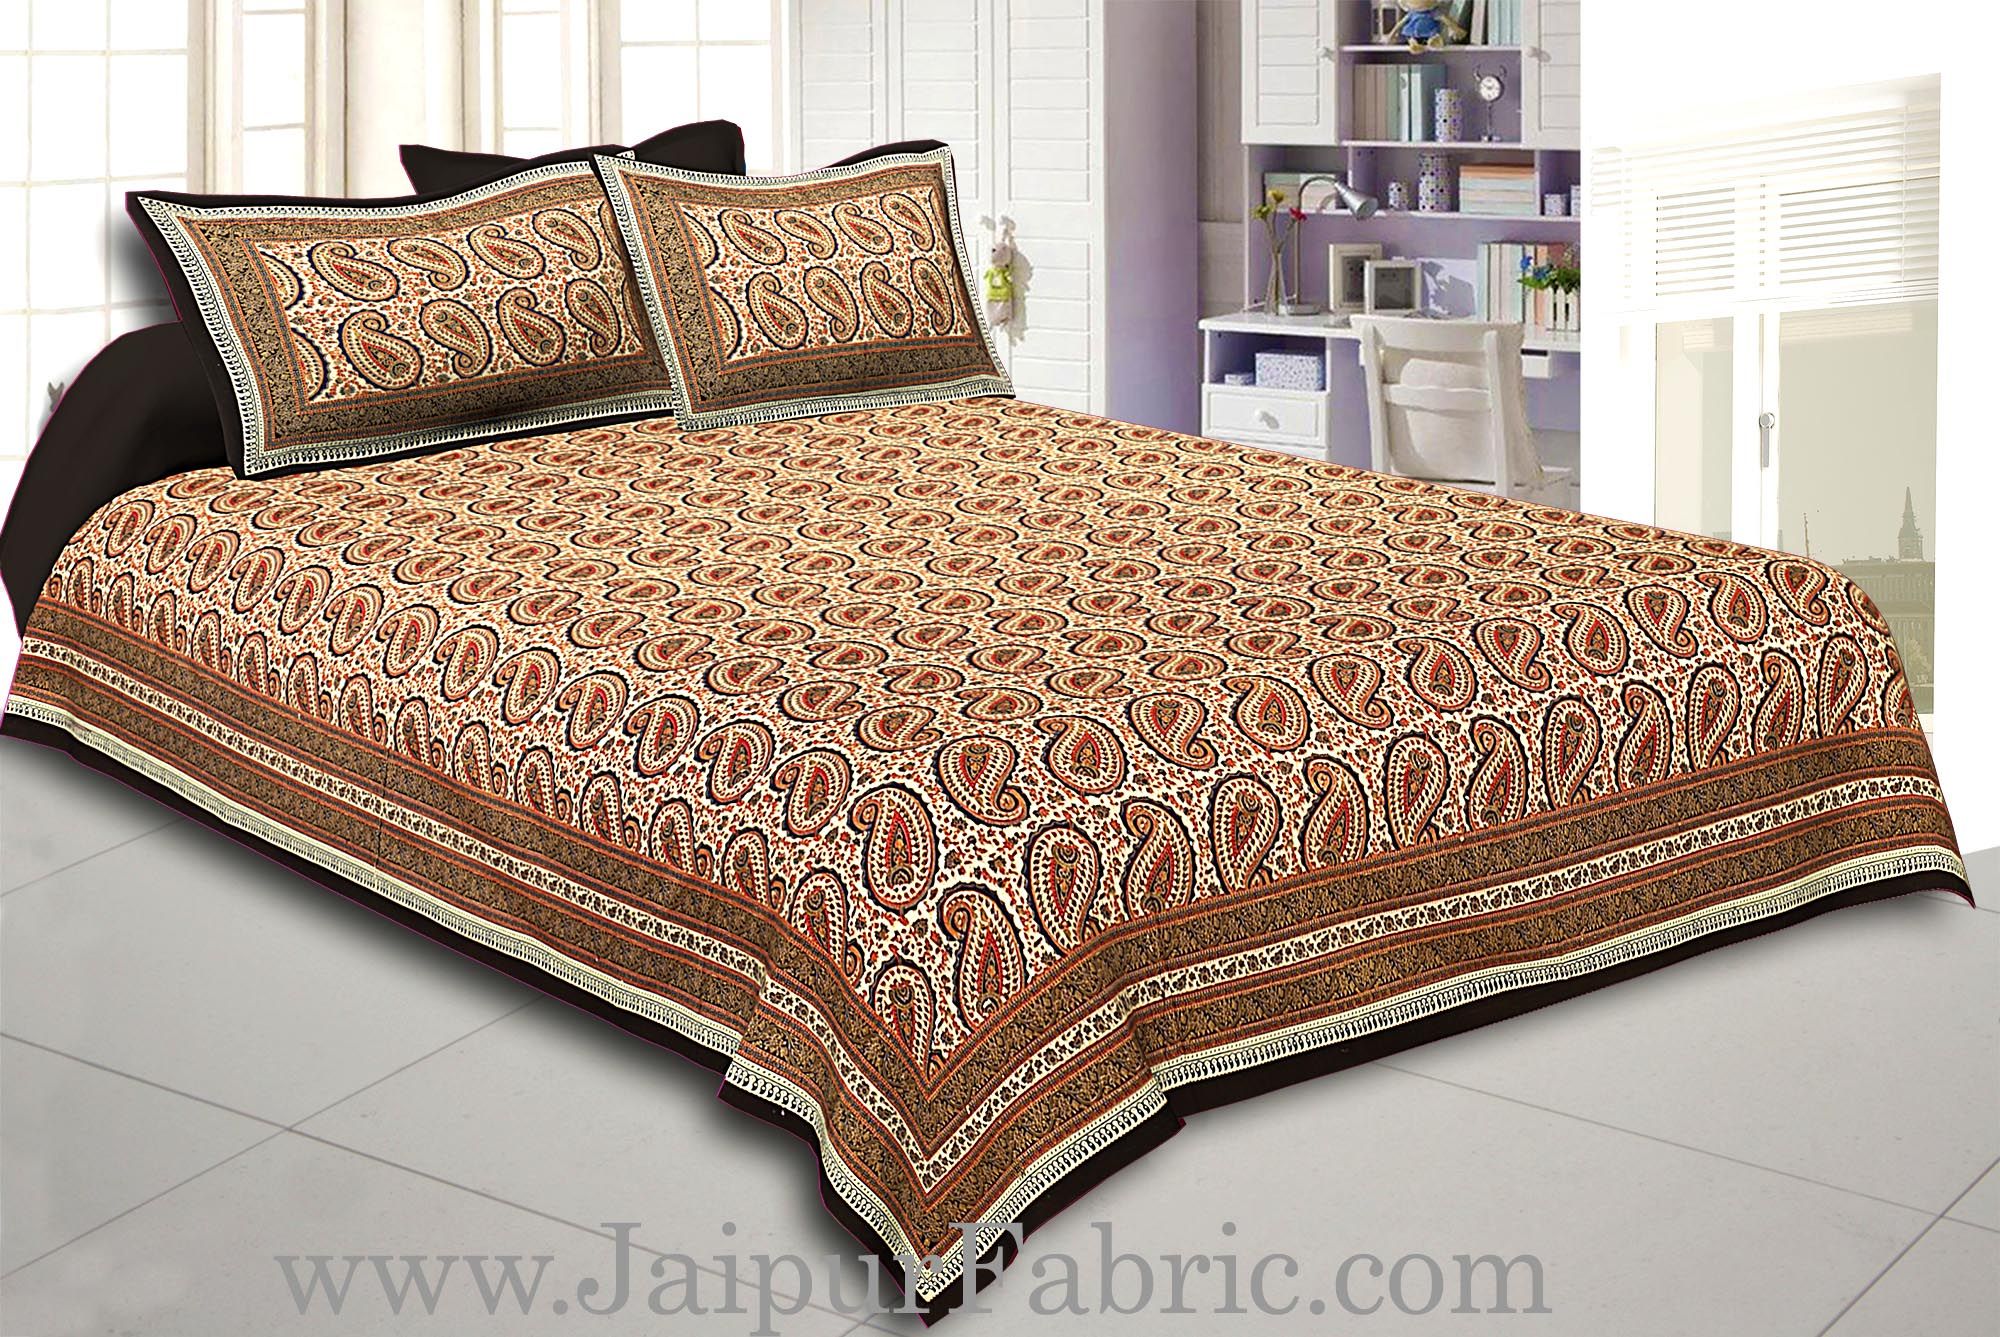 Black Border Cream Base Maroon & Blue  Paisley Pattern With Golden Print Super Fine Cotton Double Bed Sheet